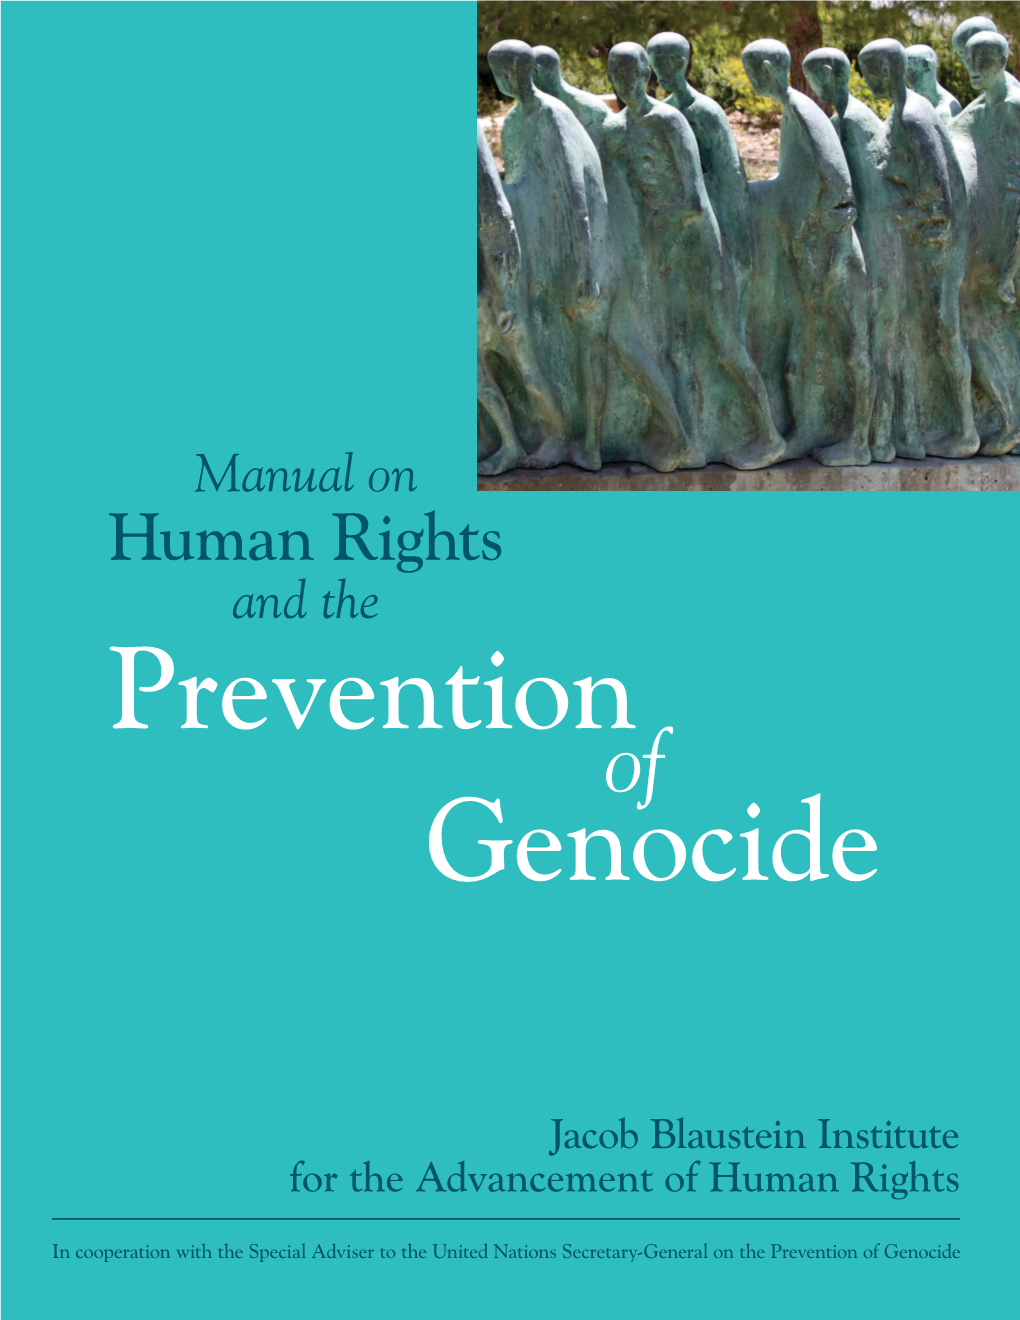 Manual on Human Rights and the Prevention of Genocide